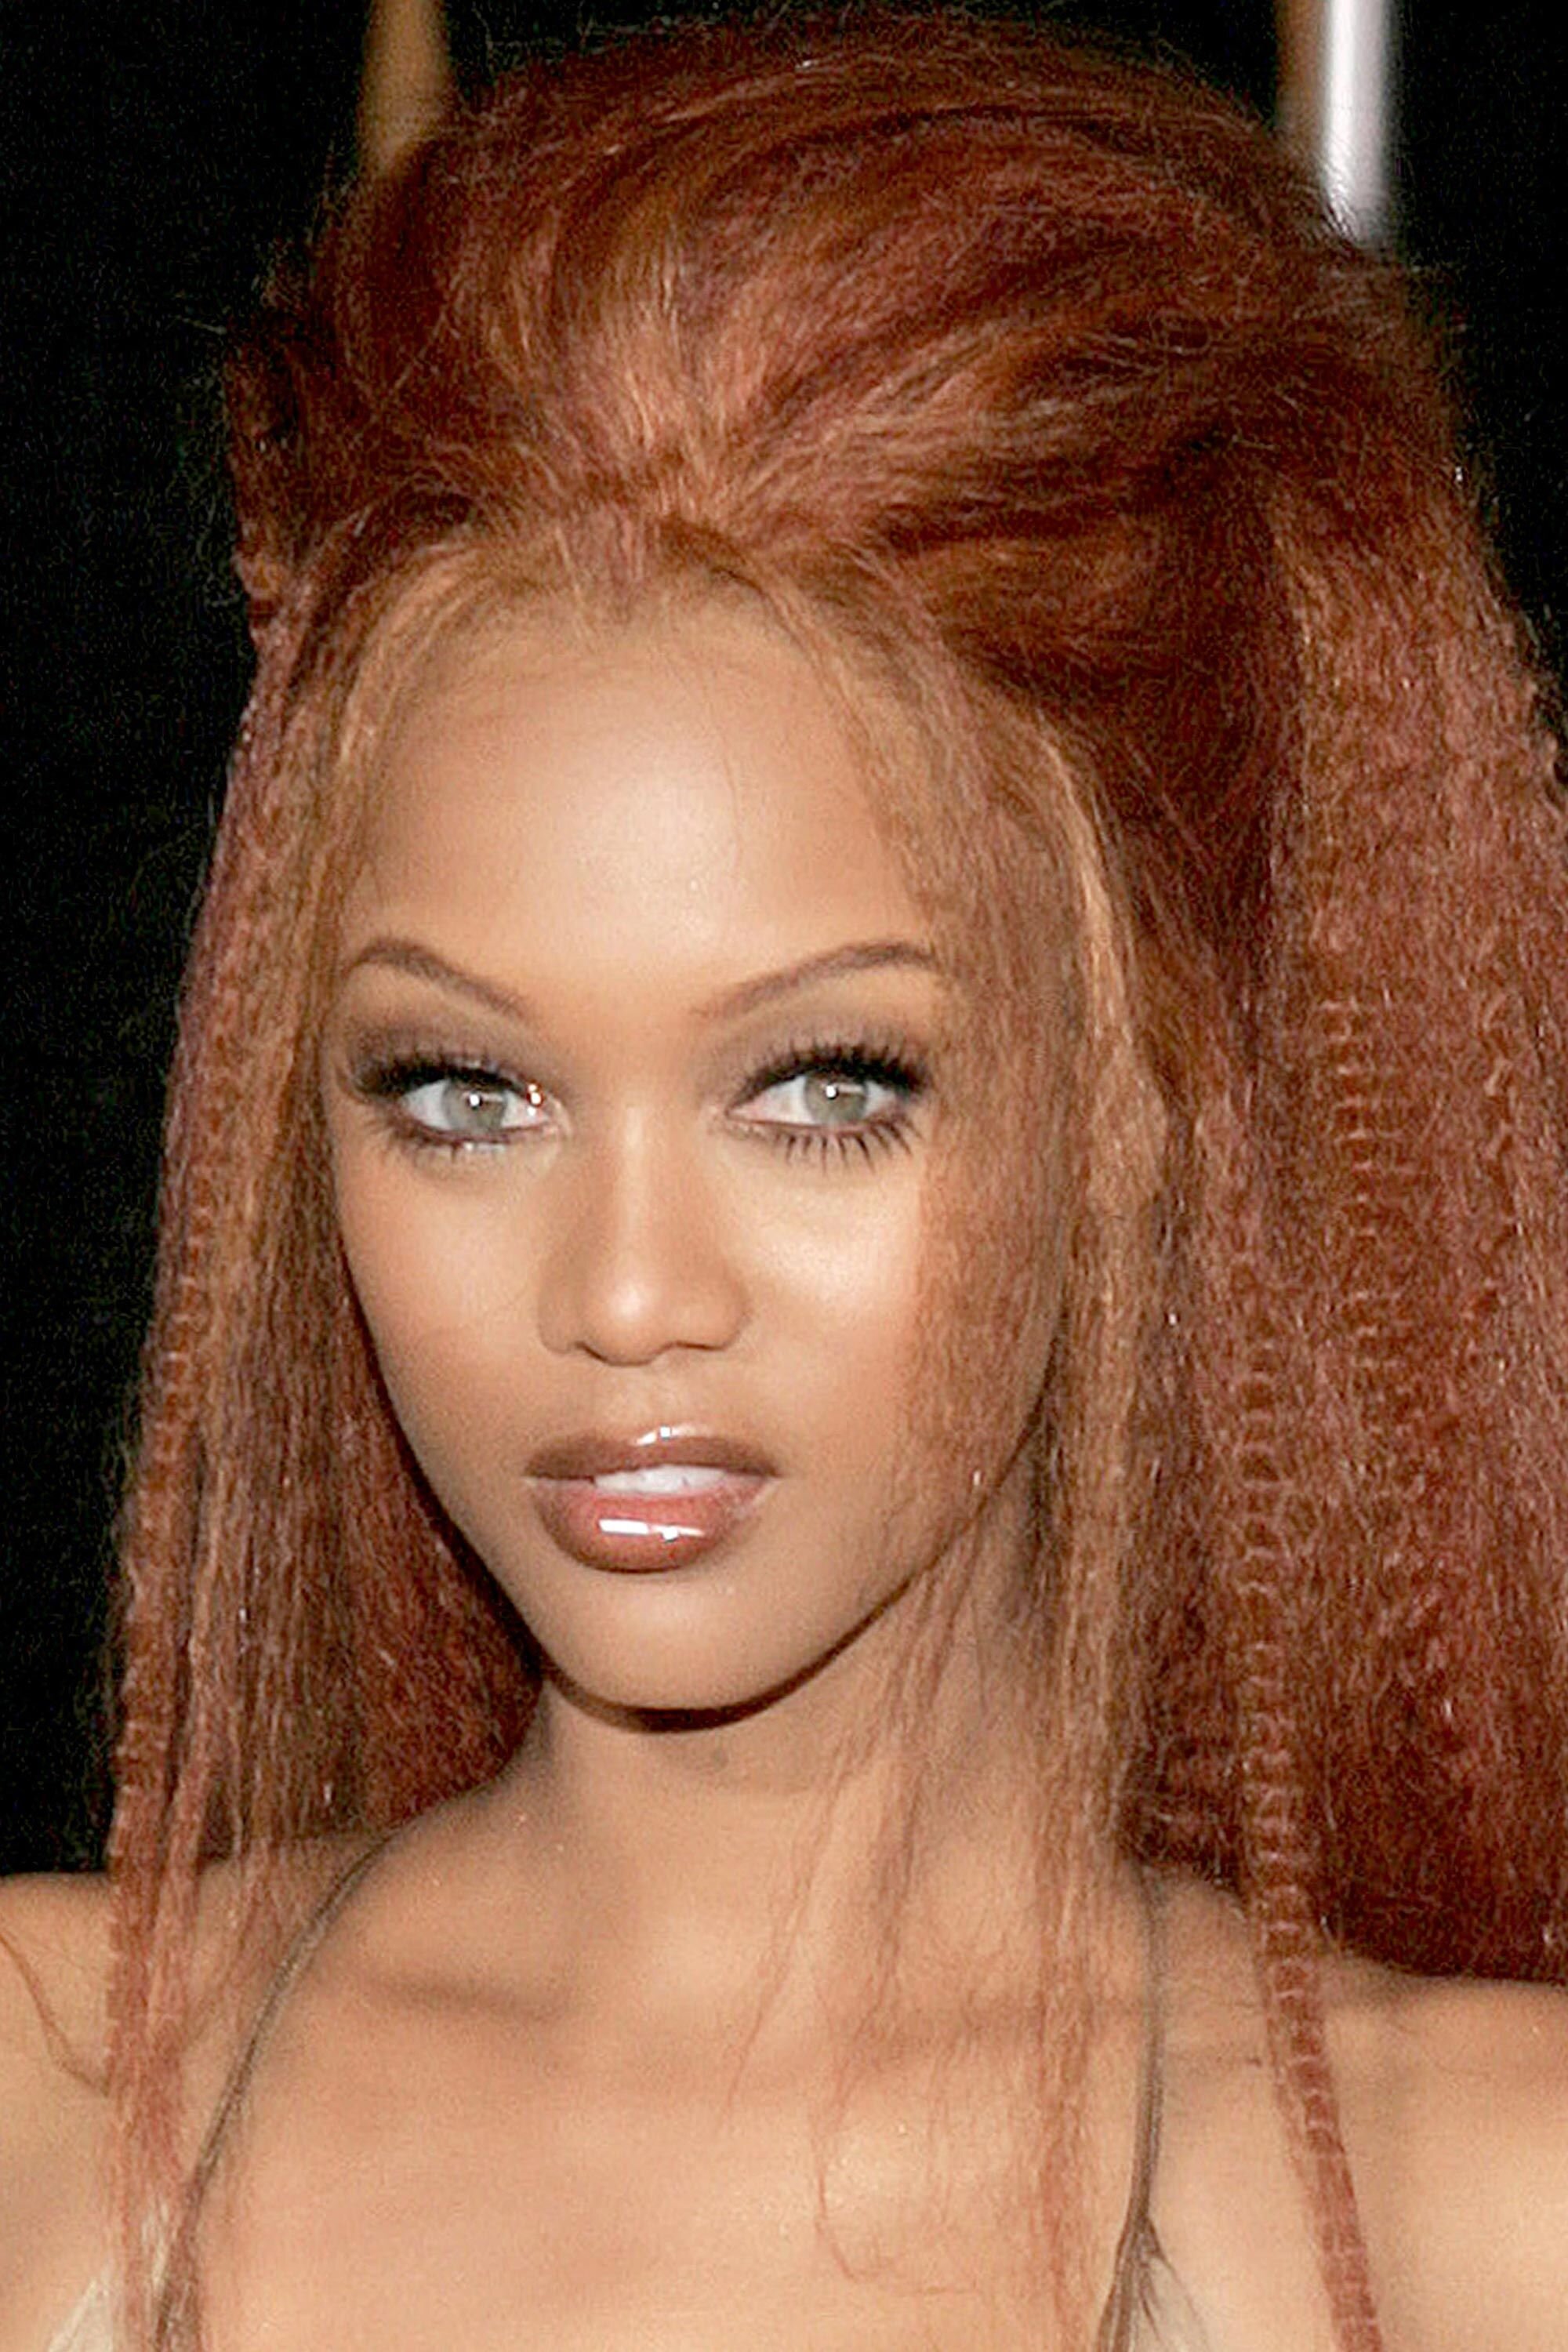  Tyra Banks in 2004.  